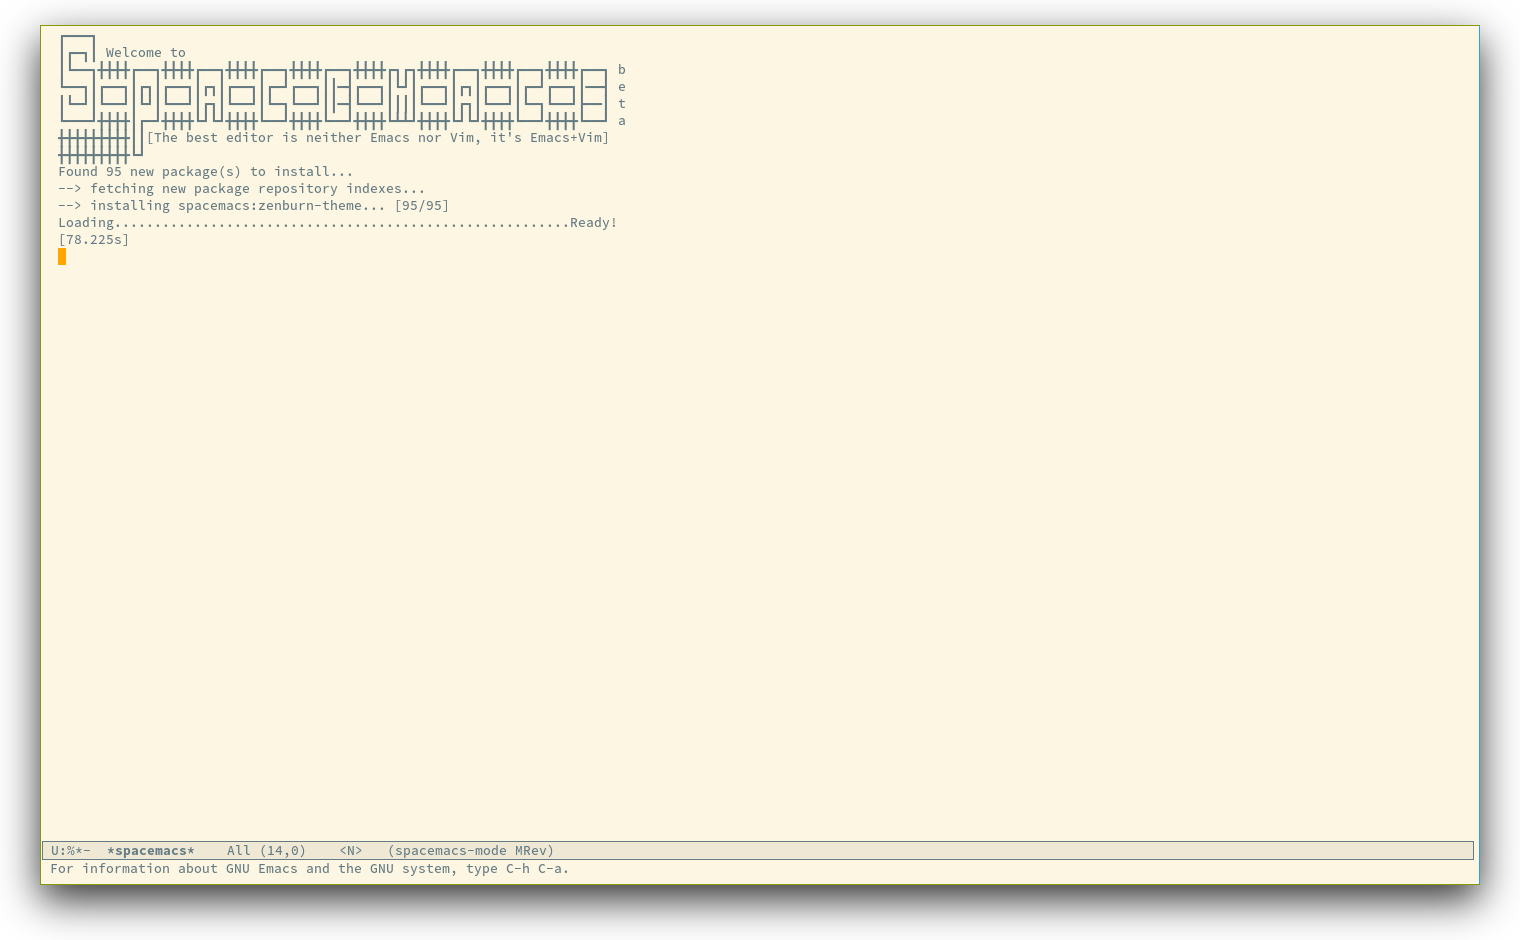 /TakeV/spacemacs/media/commit/ccb5ce55780fea43fb1208de41279a93112a3828/doc/img/spacemacs-startup.png